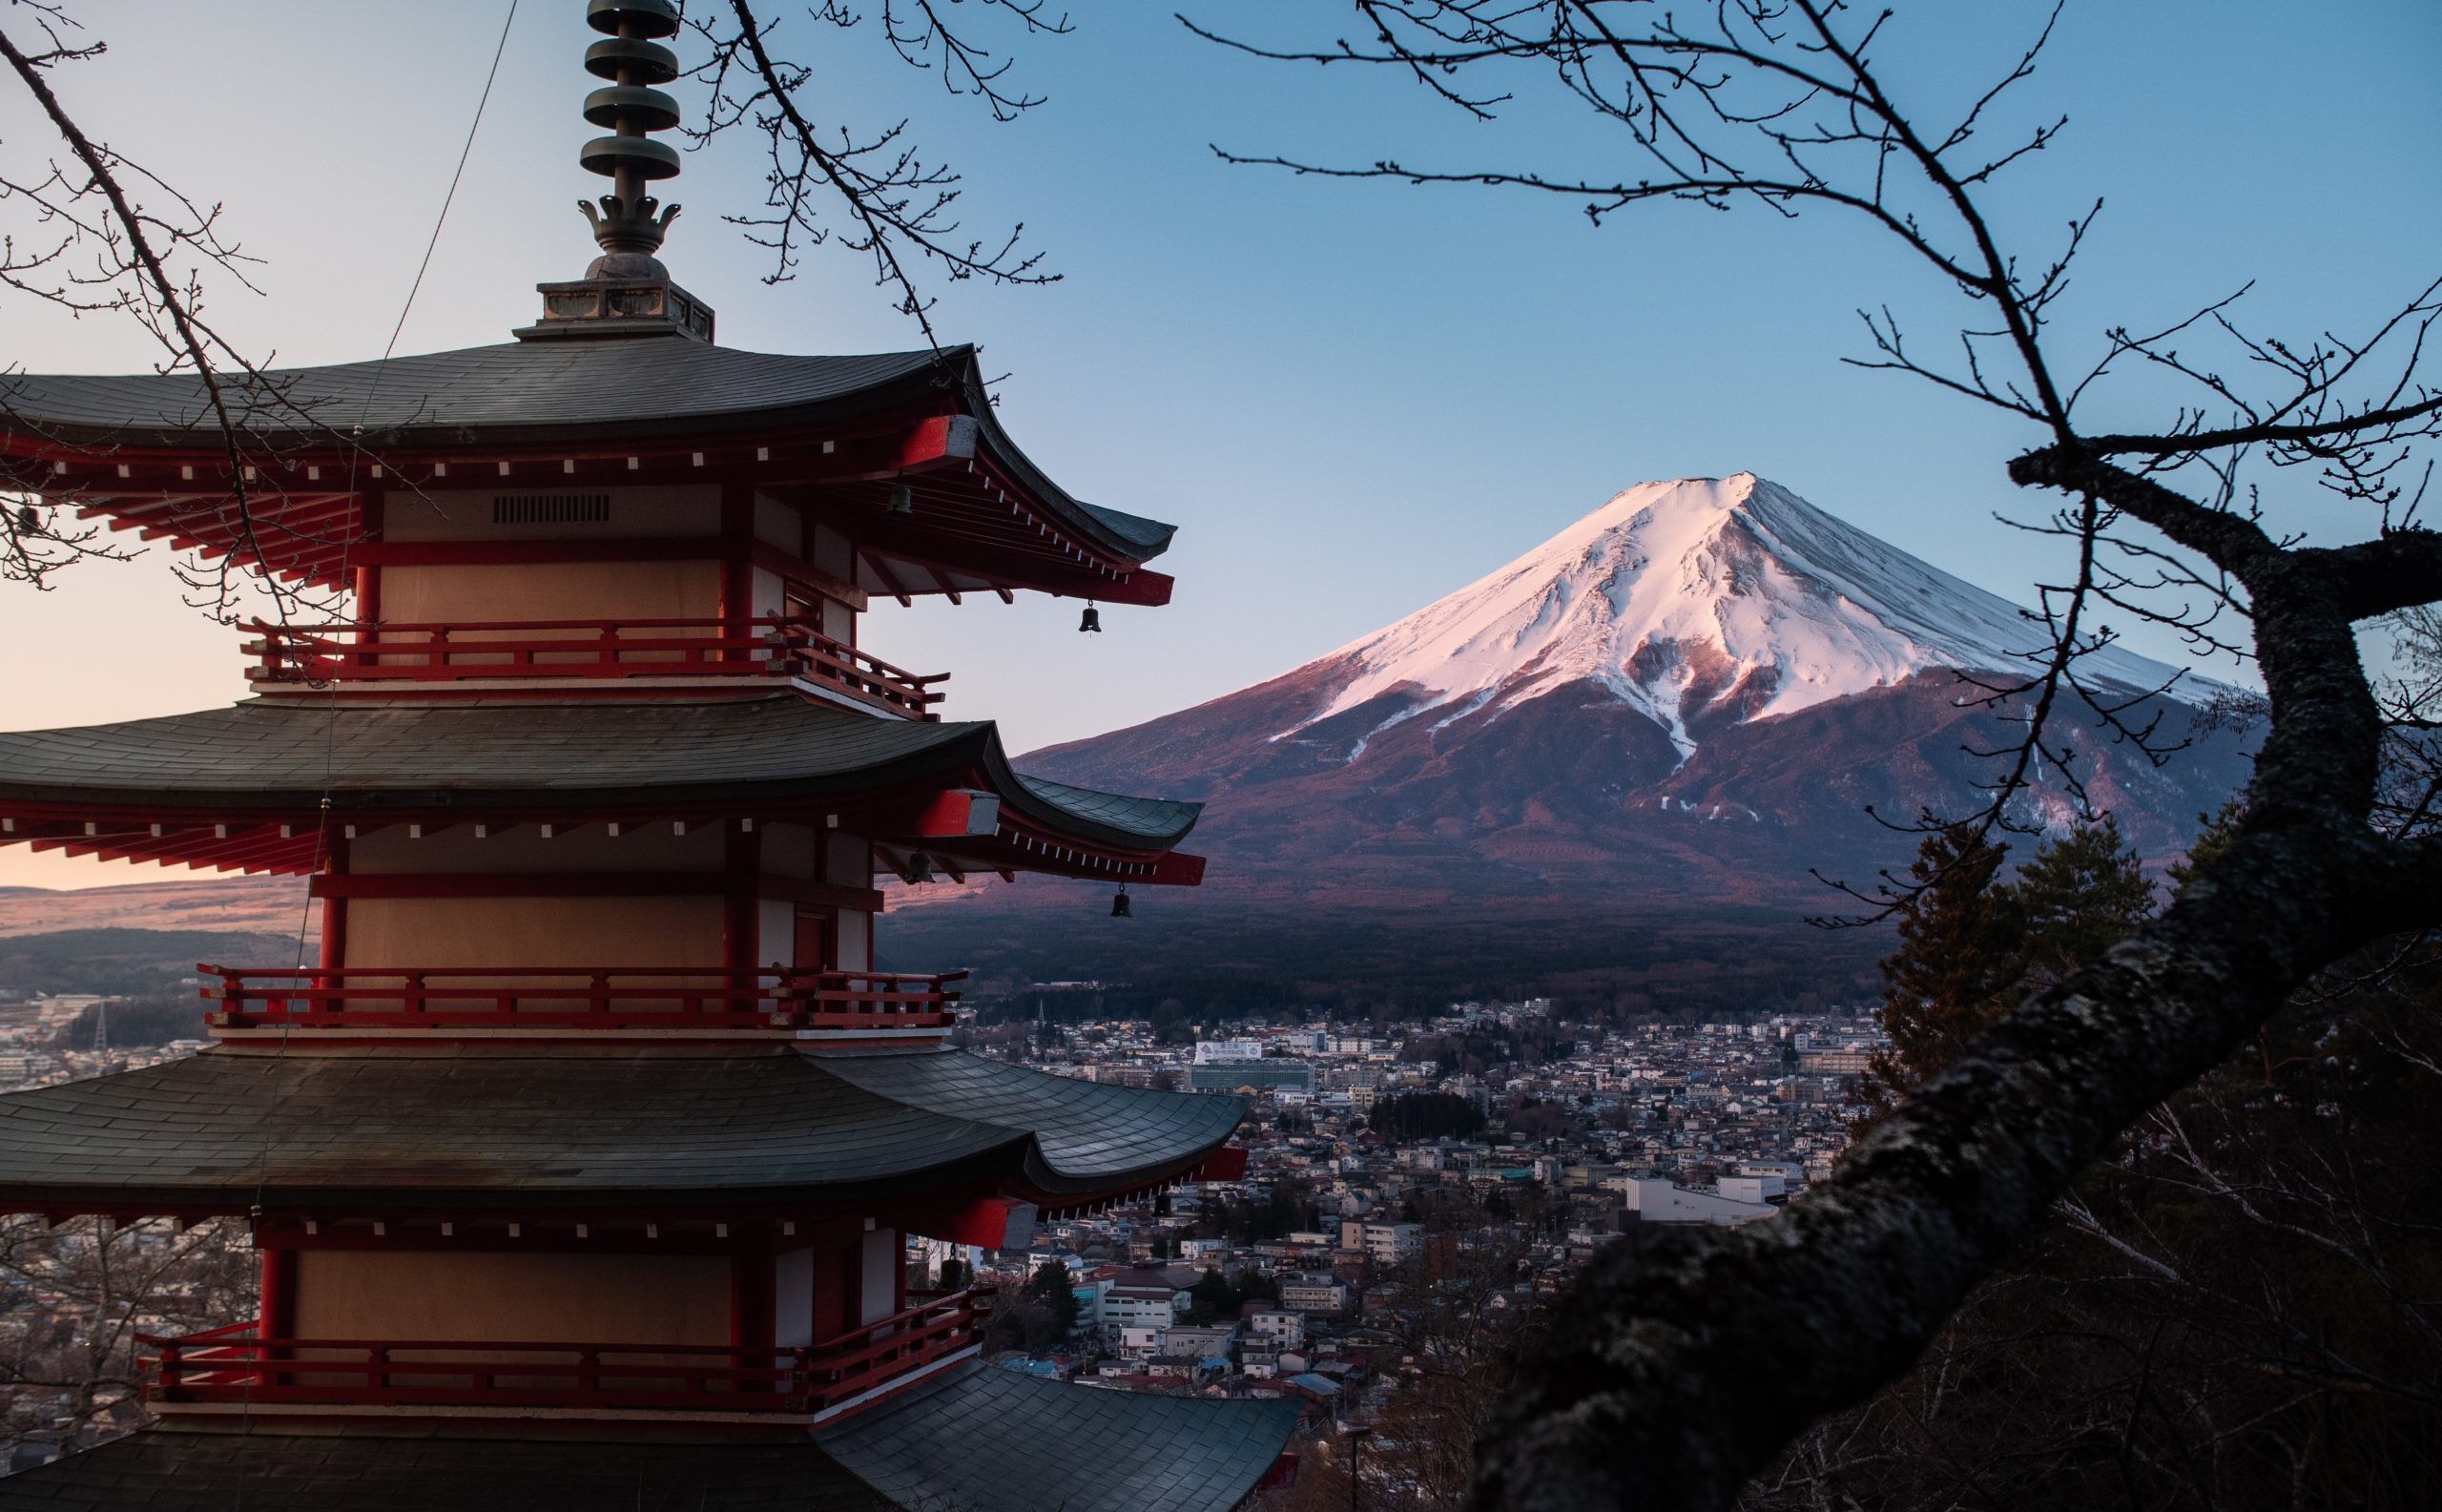 The red Chureito Pagoda in Japan, with Fujiyama (Mount Fuji) in the background.